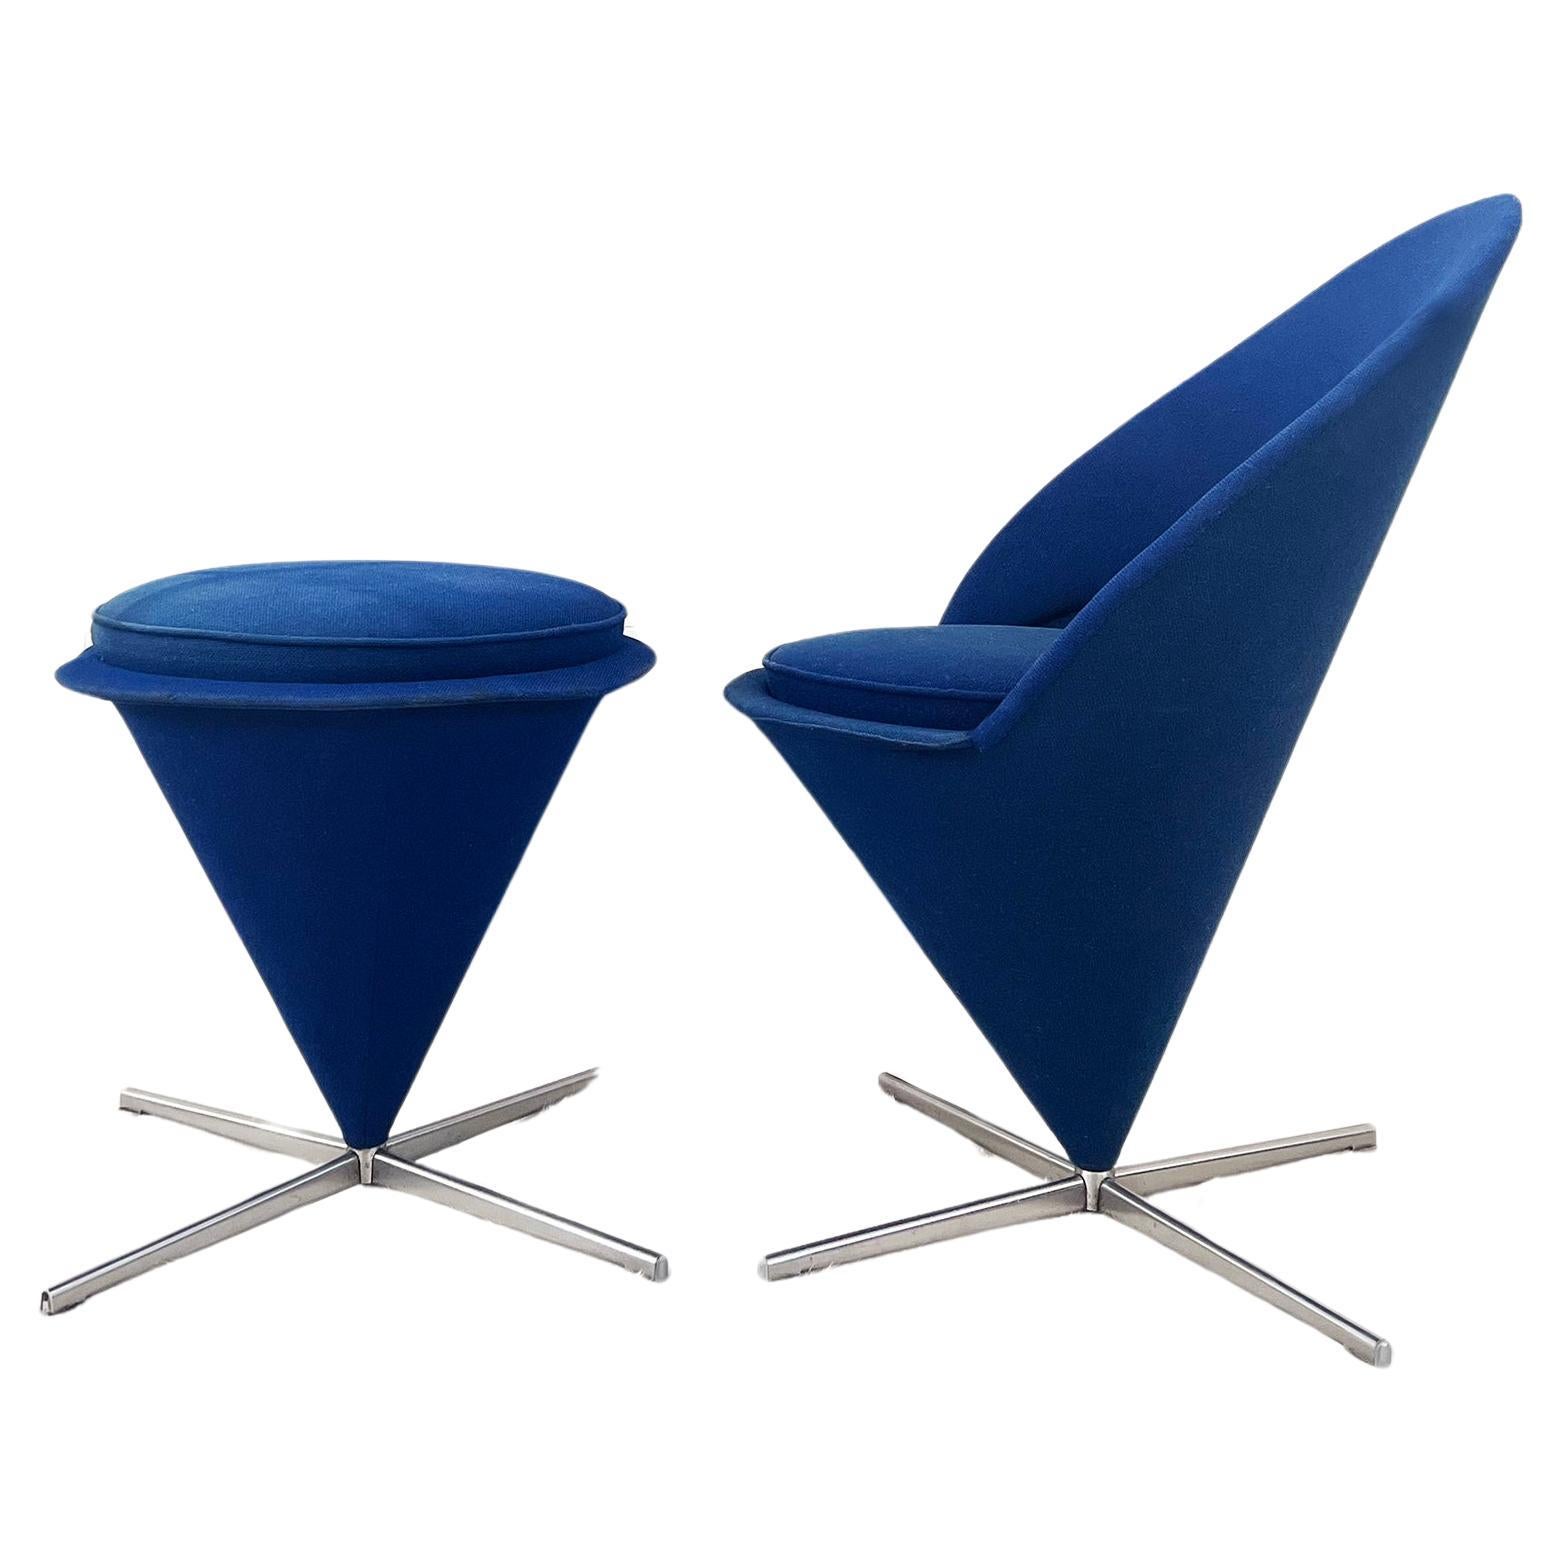 1960s Original Early Verner Panton Cone Swivel Chair + Ottoman SET-- 2 pieces For Sale